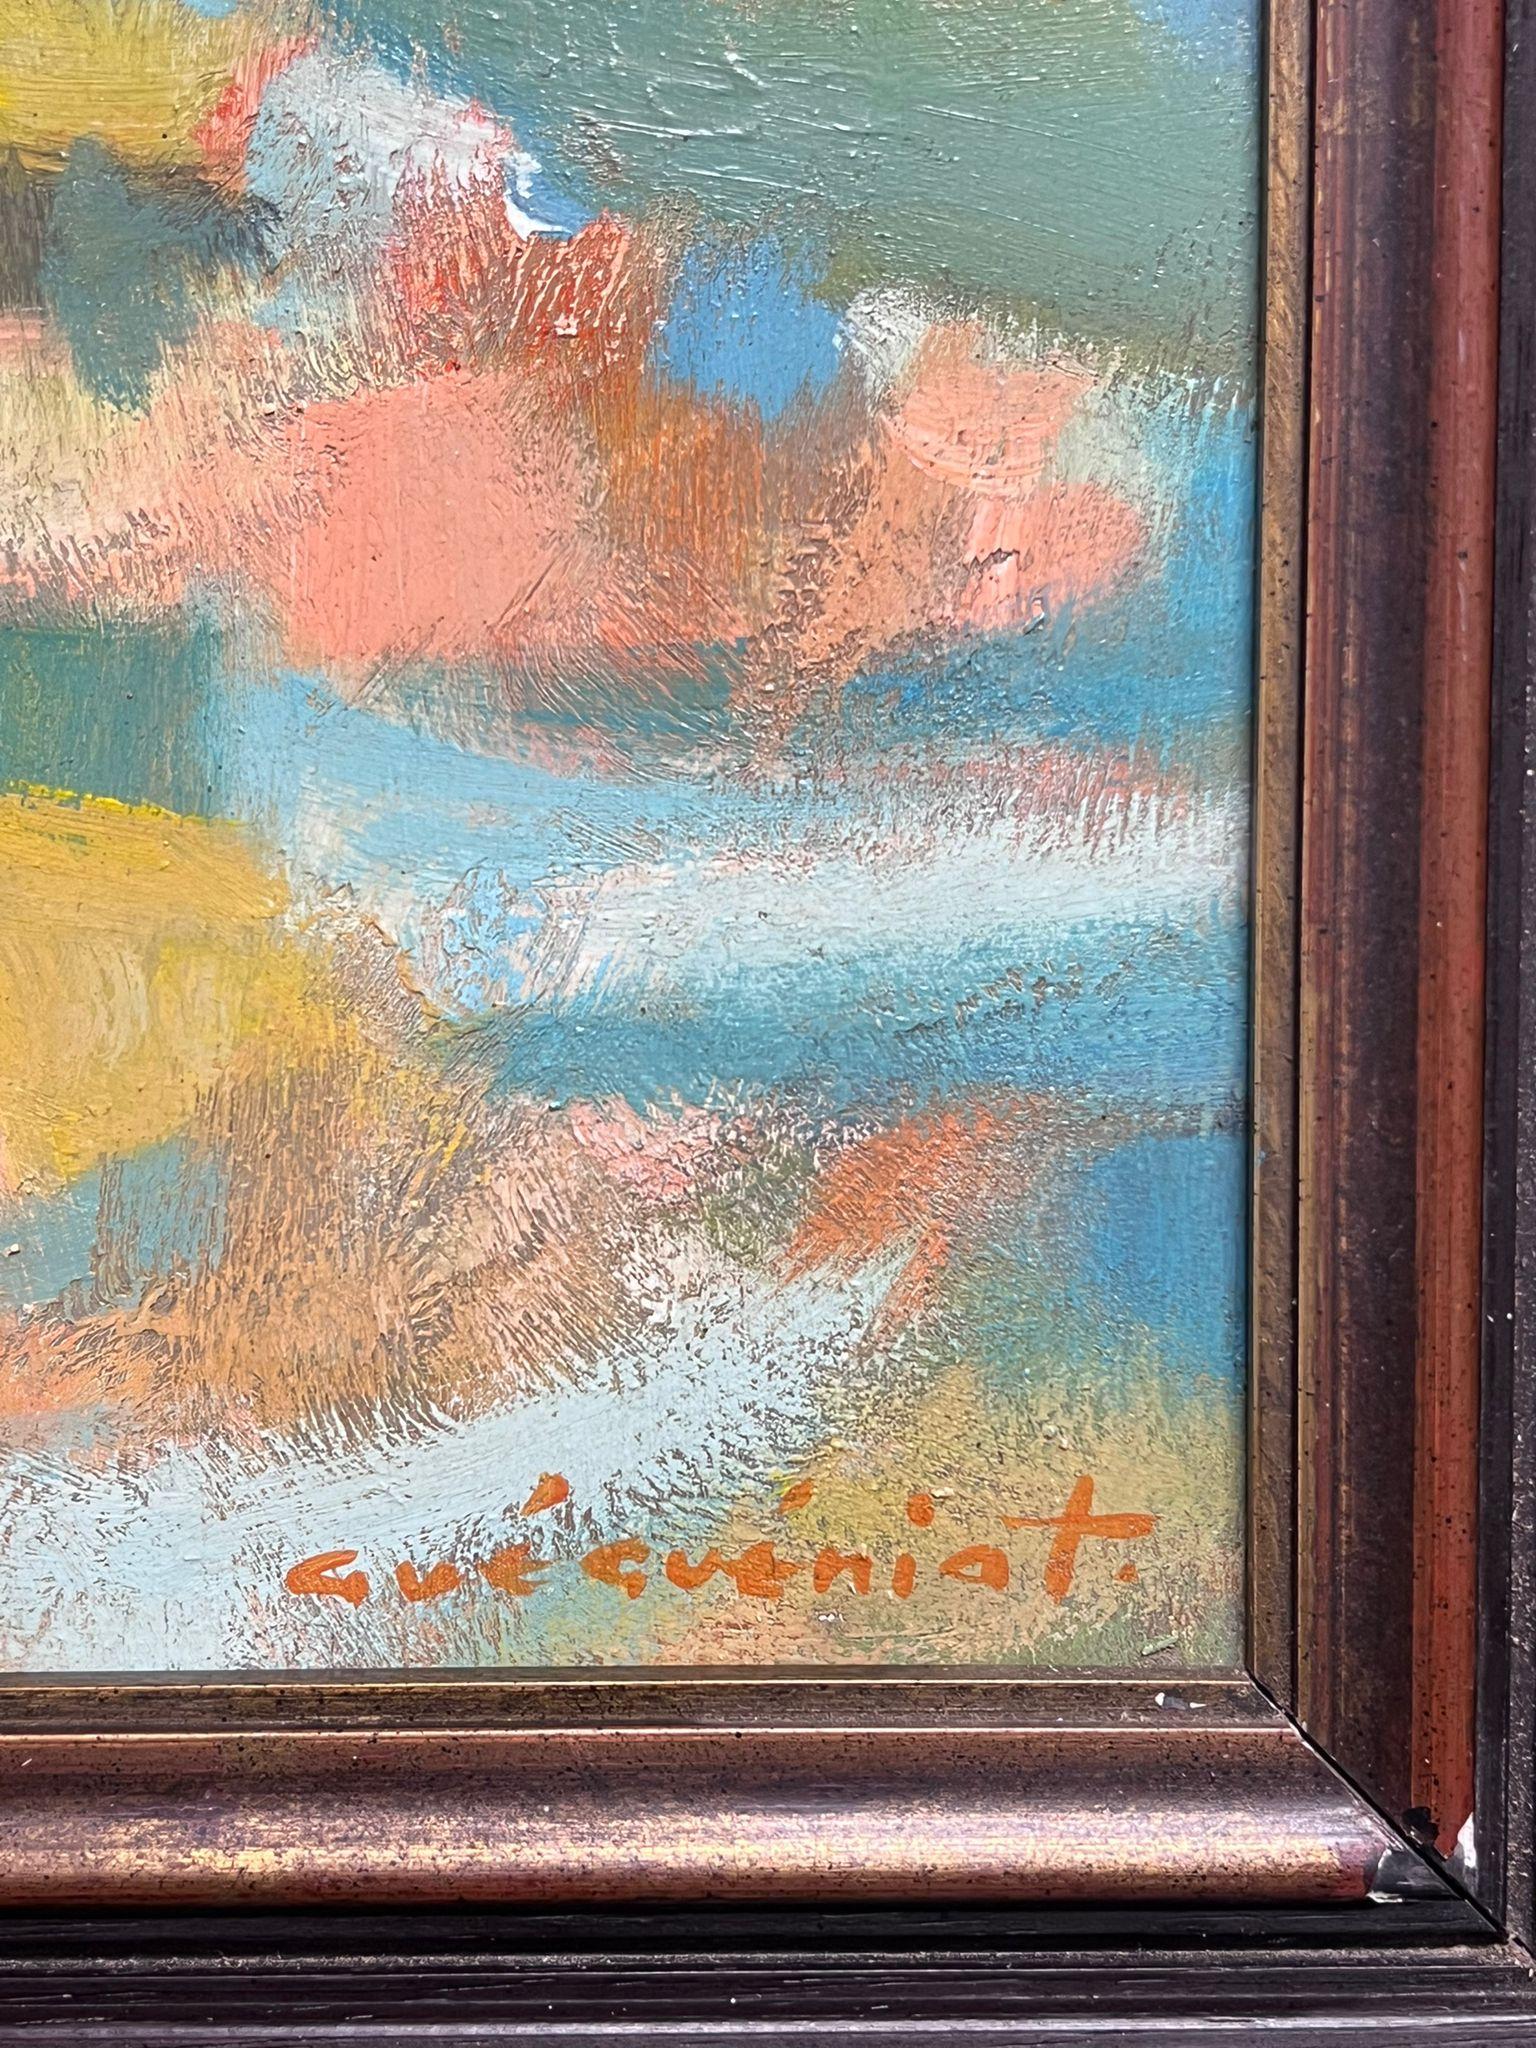 Abstract Expressionist Sky Composition
by Gerard Guegueniat (French 1970's)
signed oil painting on board, framed
framed: 21.5 x 27 inches
board: 18 x 12 inches
provenance: private collection, France
condition: very good and sound condition 

Gérard